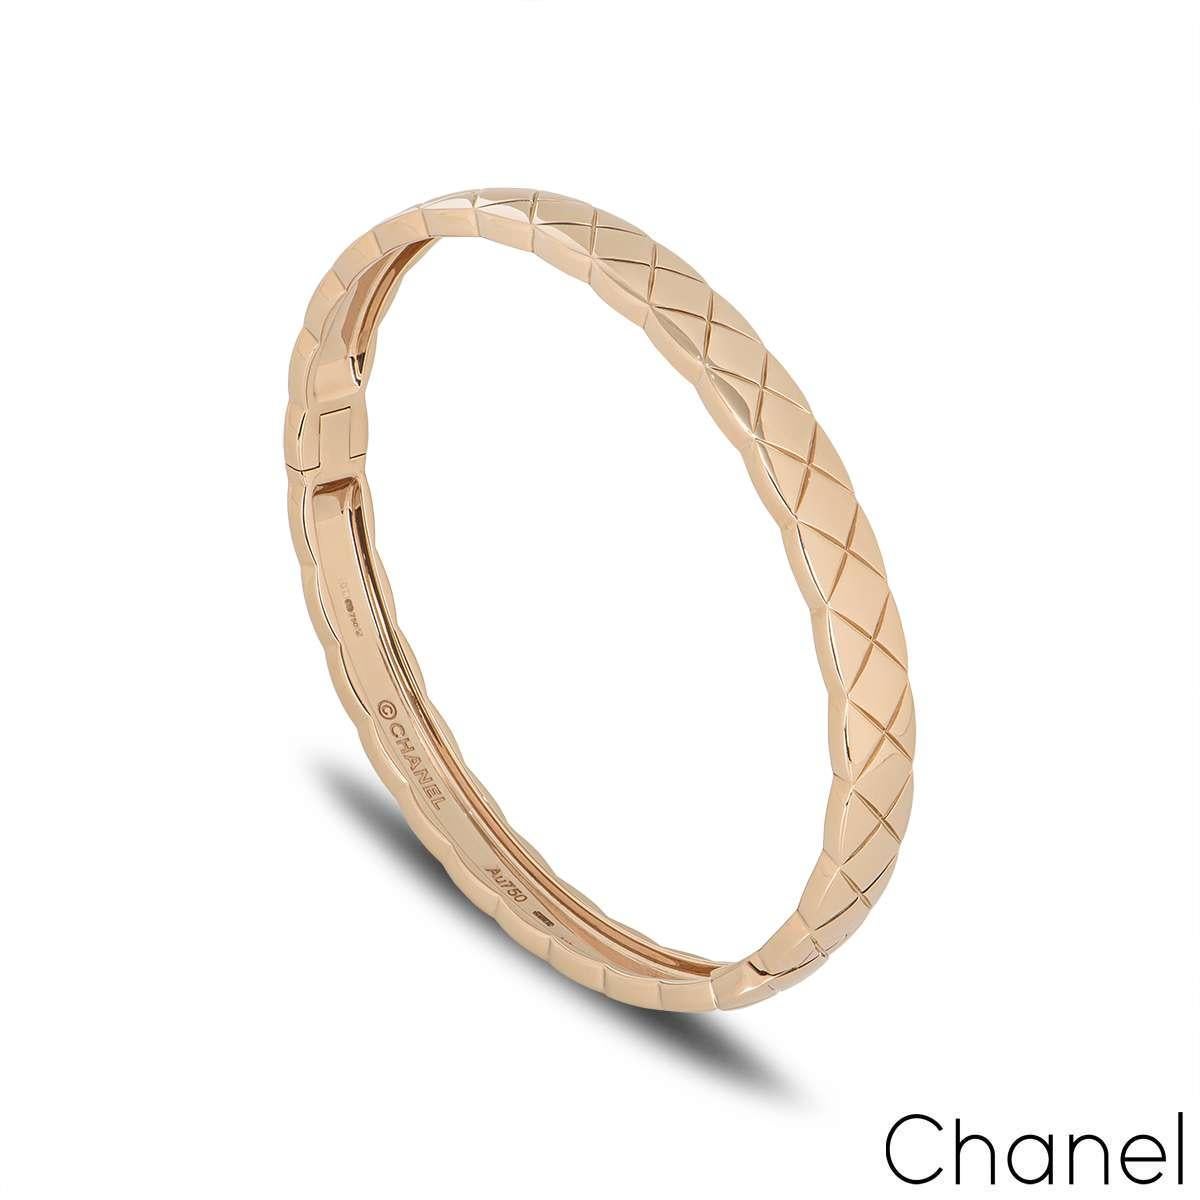 A beautiful 18k beige/rose gold diamond Chanel bracelet from the Coco Crush collection. The bracelet comprises of a quilted motif and measures 6mm in width. The bracelet is a size medium and has a gross weight of 26.2 grams.

The bracelet comes